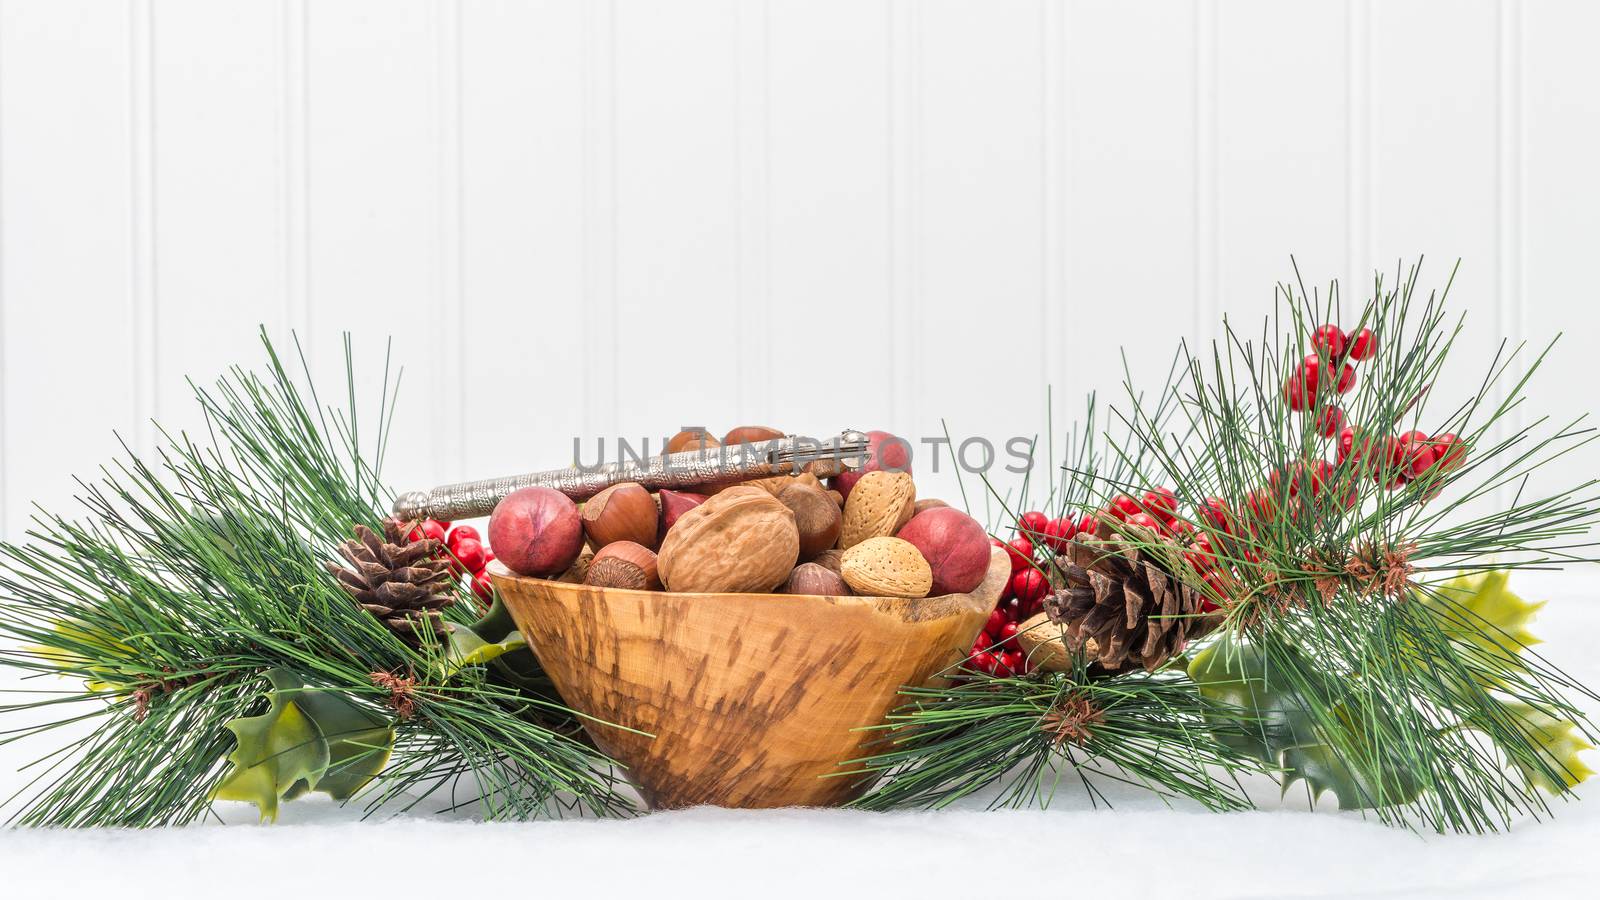 Holiday Season Mixed Nuts by billberryphotography